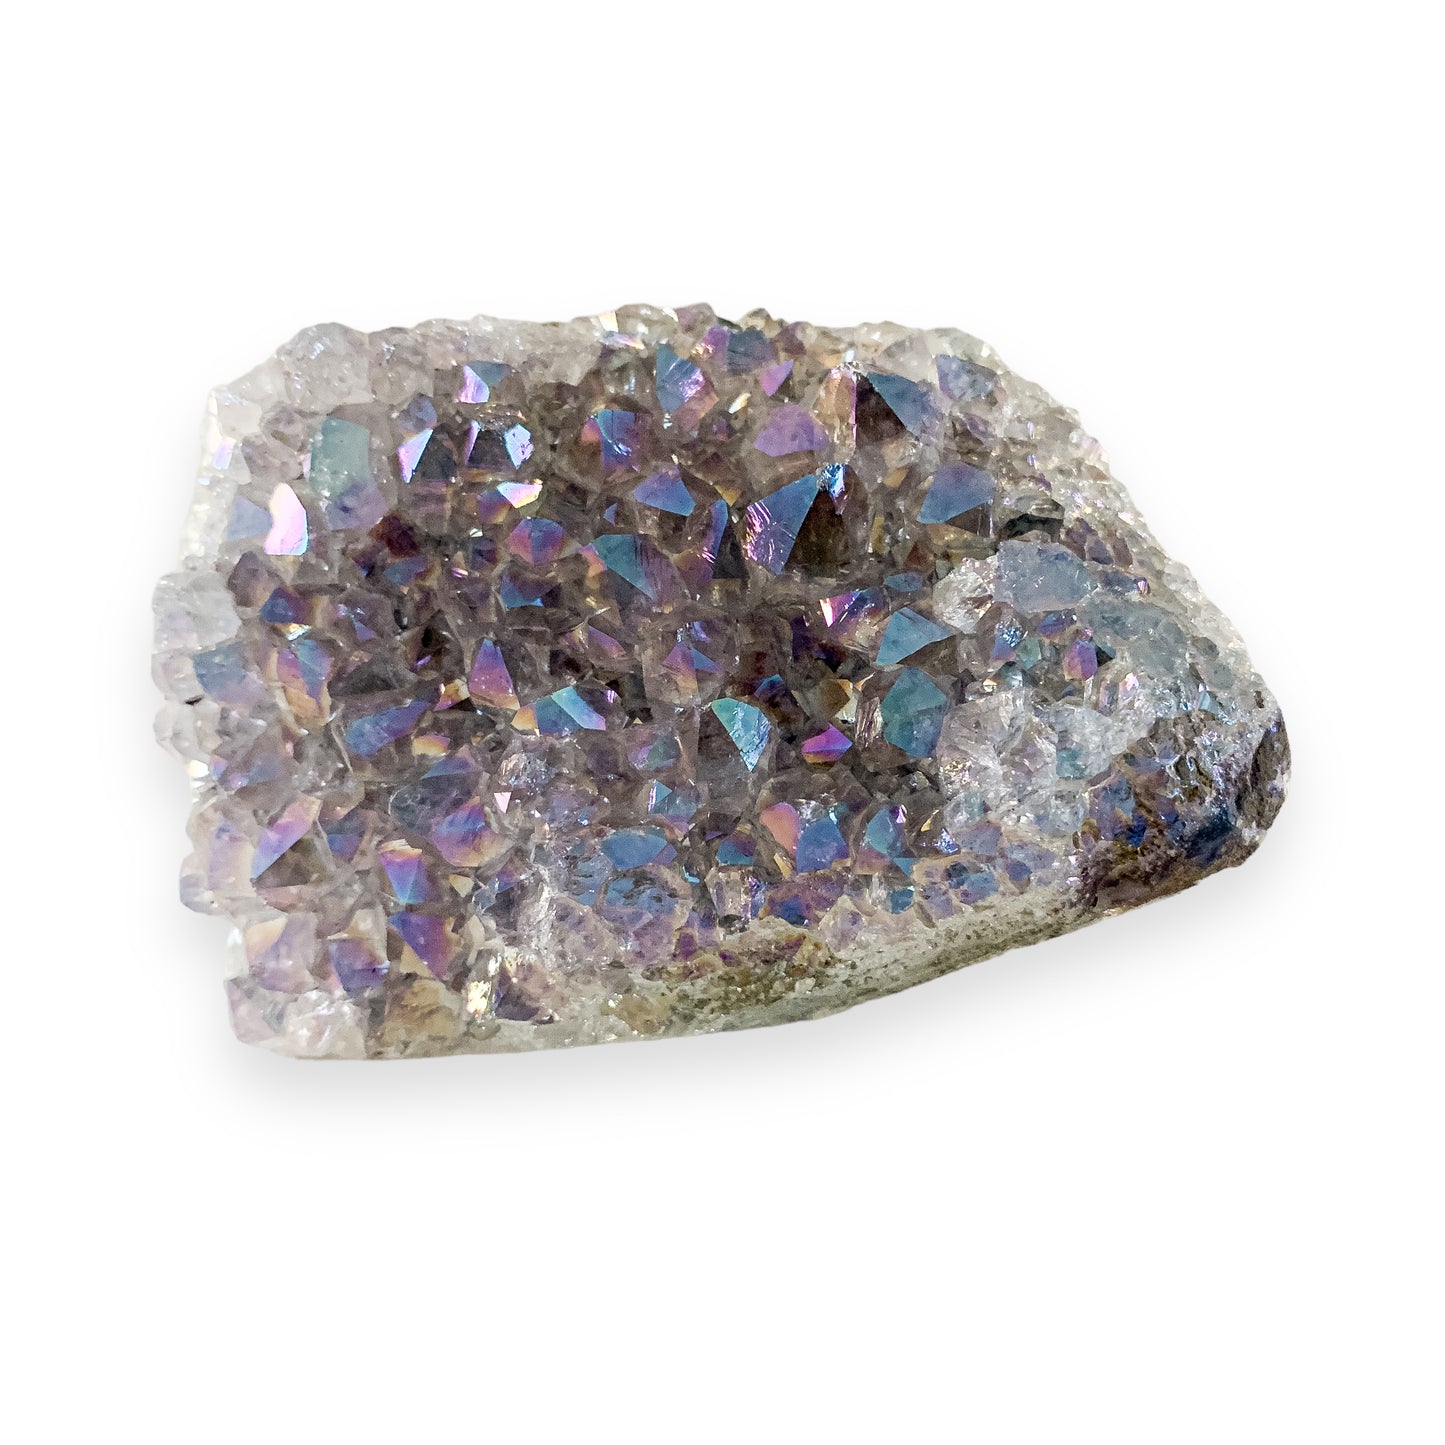 Aura Quartz Crystals: Enhance Your Energy and Well-Being